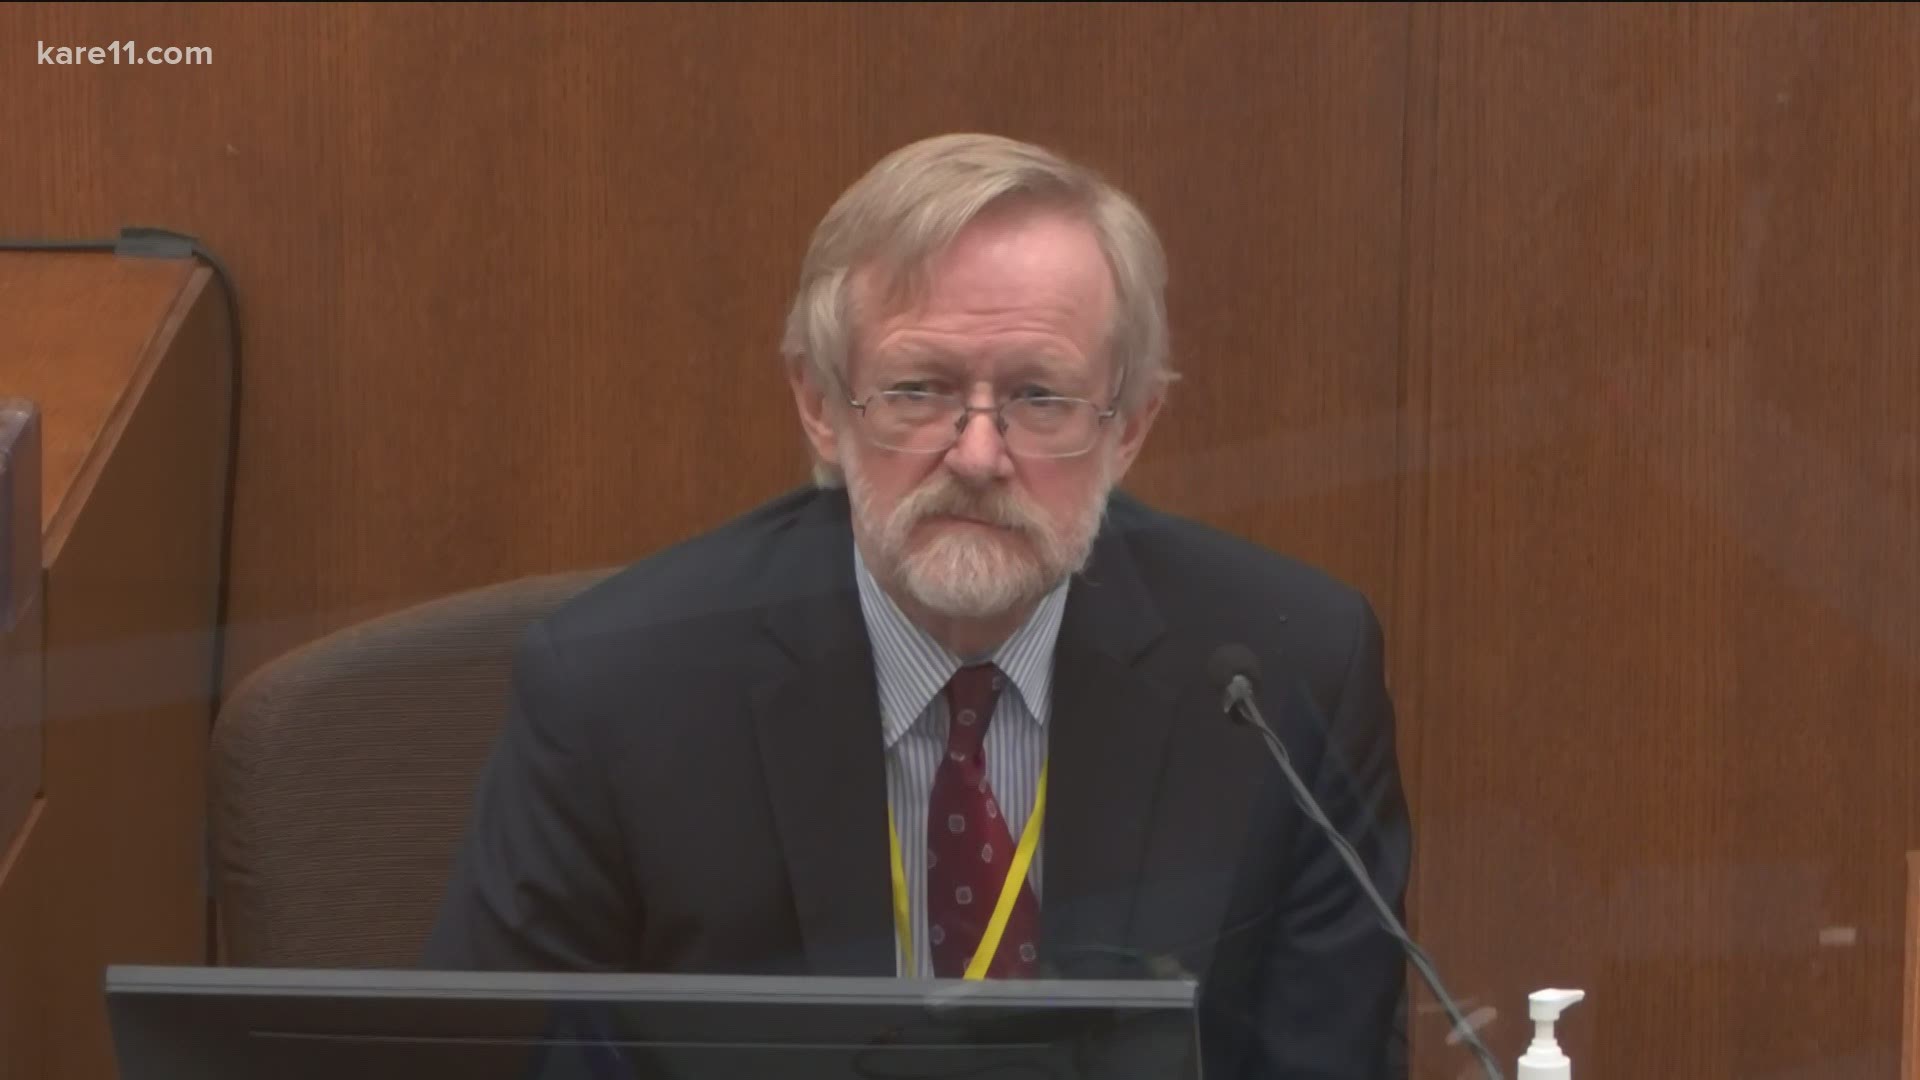 "A healthy person subjected to what Mr. Floyd was subjected to would have died as a result of what he was subjected to," pulmonologist Dr. Martin Tobin testified.